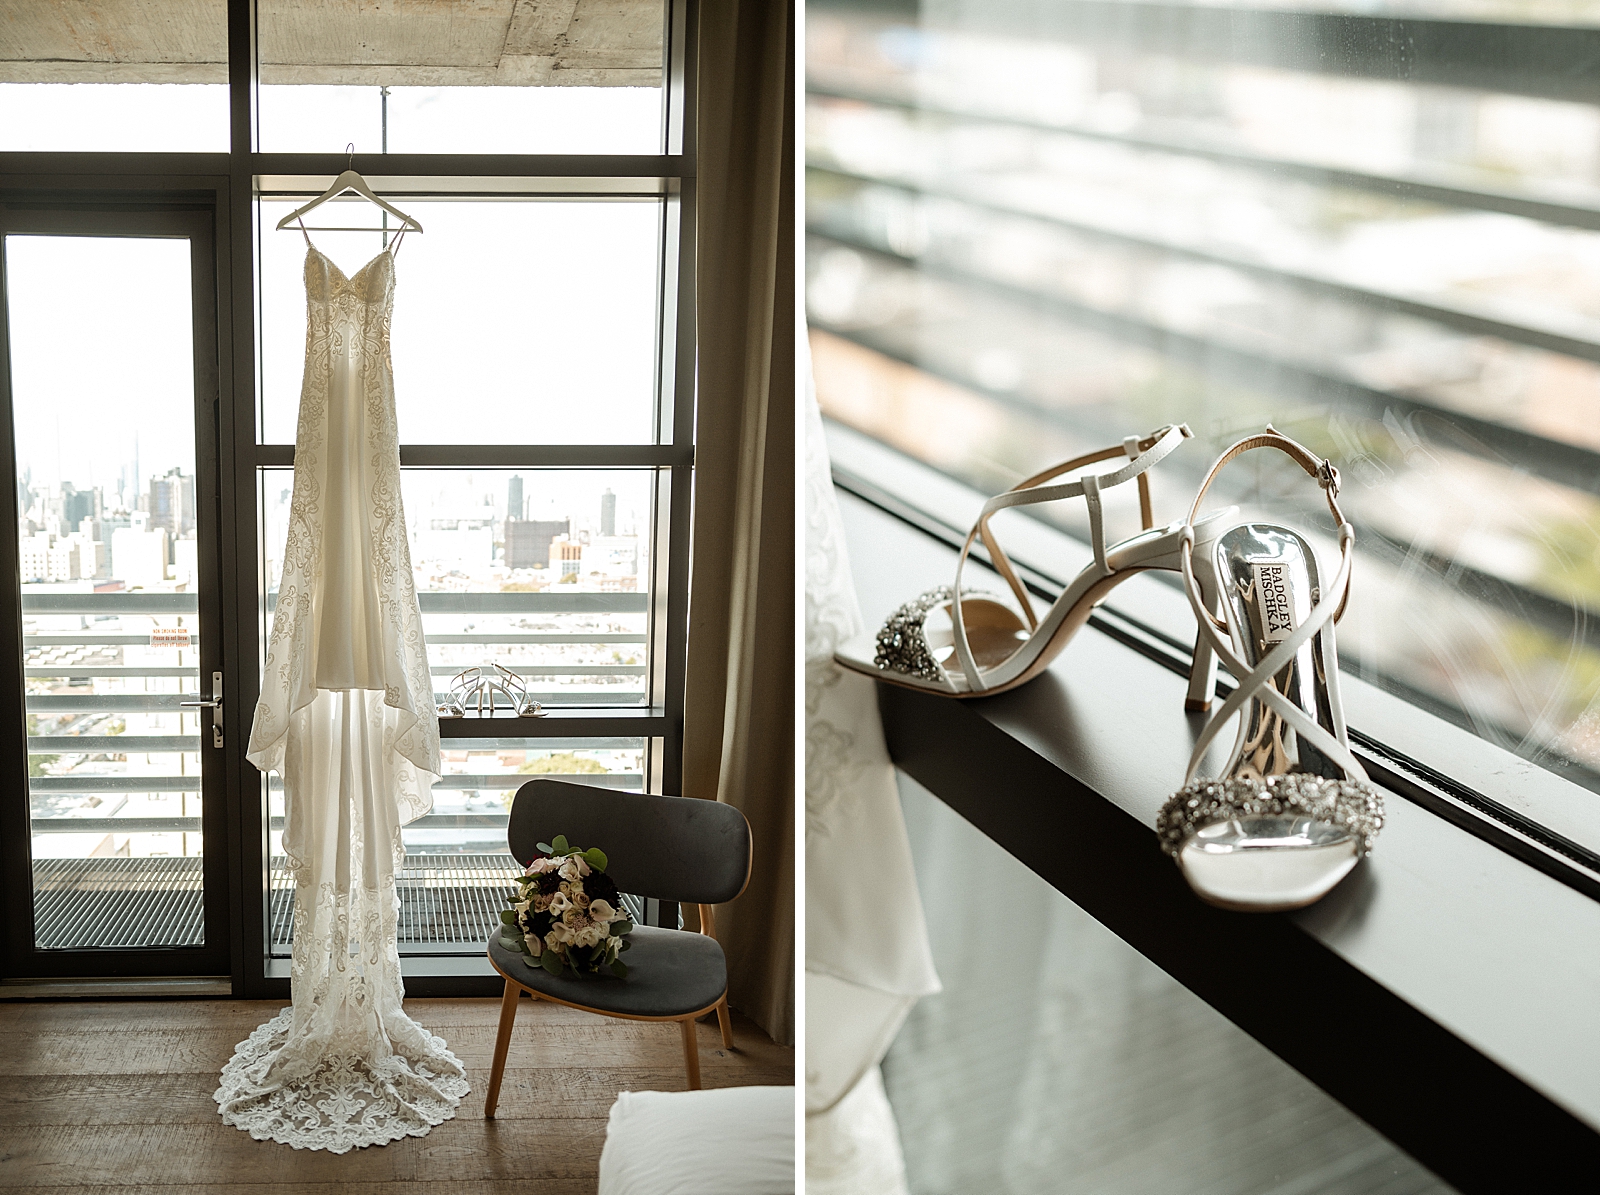 Detail shot of wedding dress hanging by window and wedding shoes